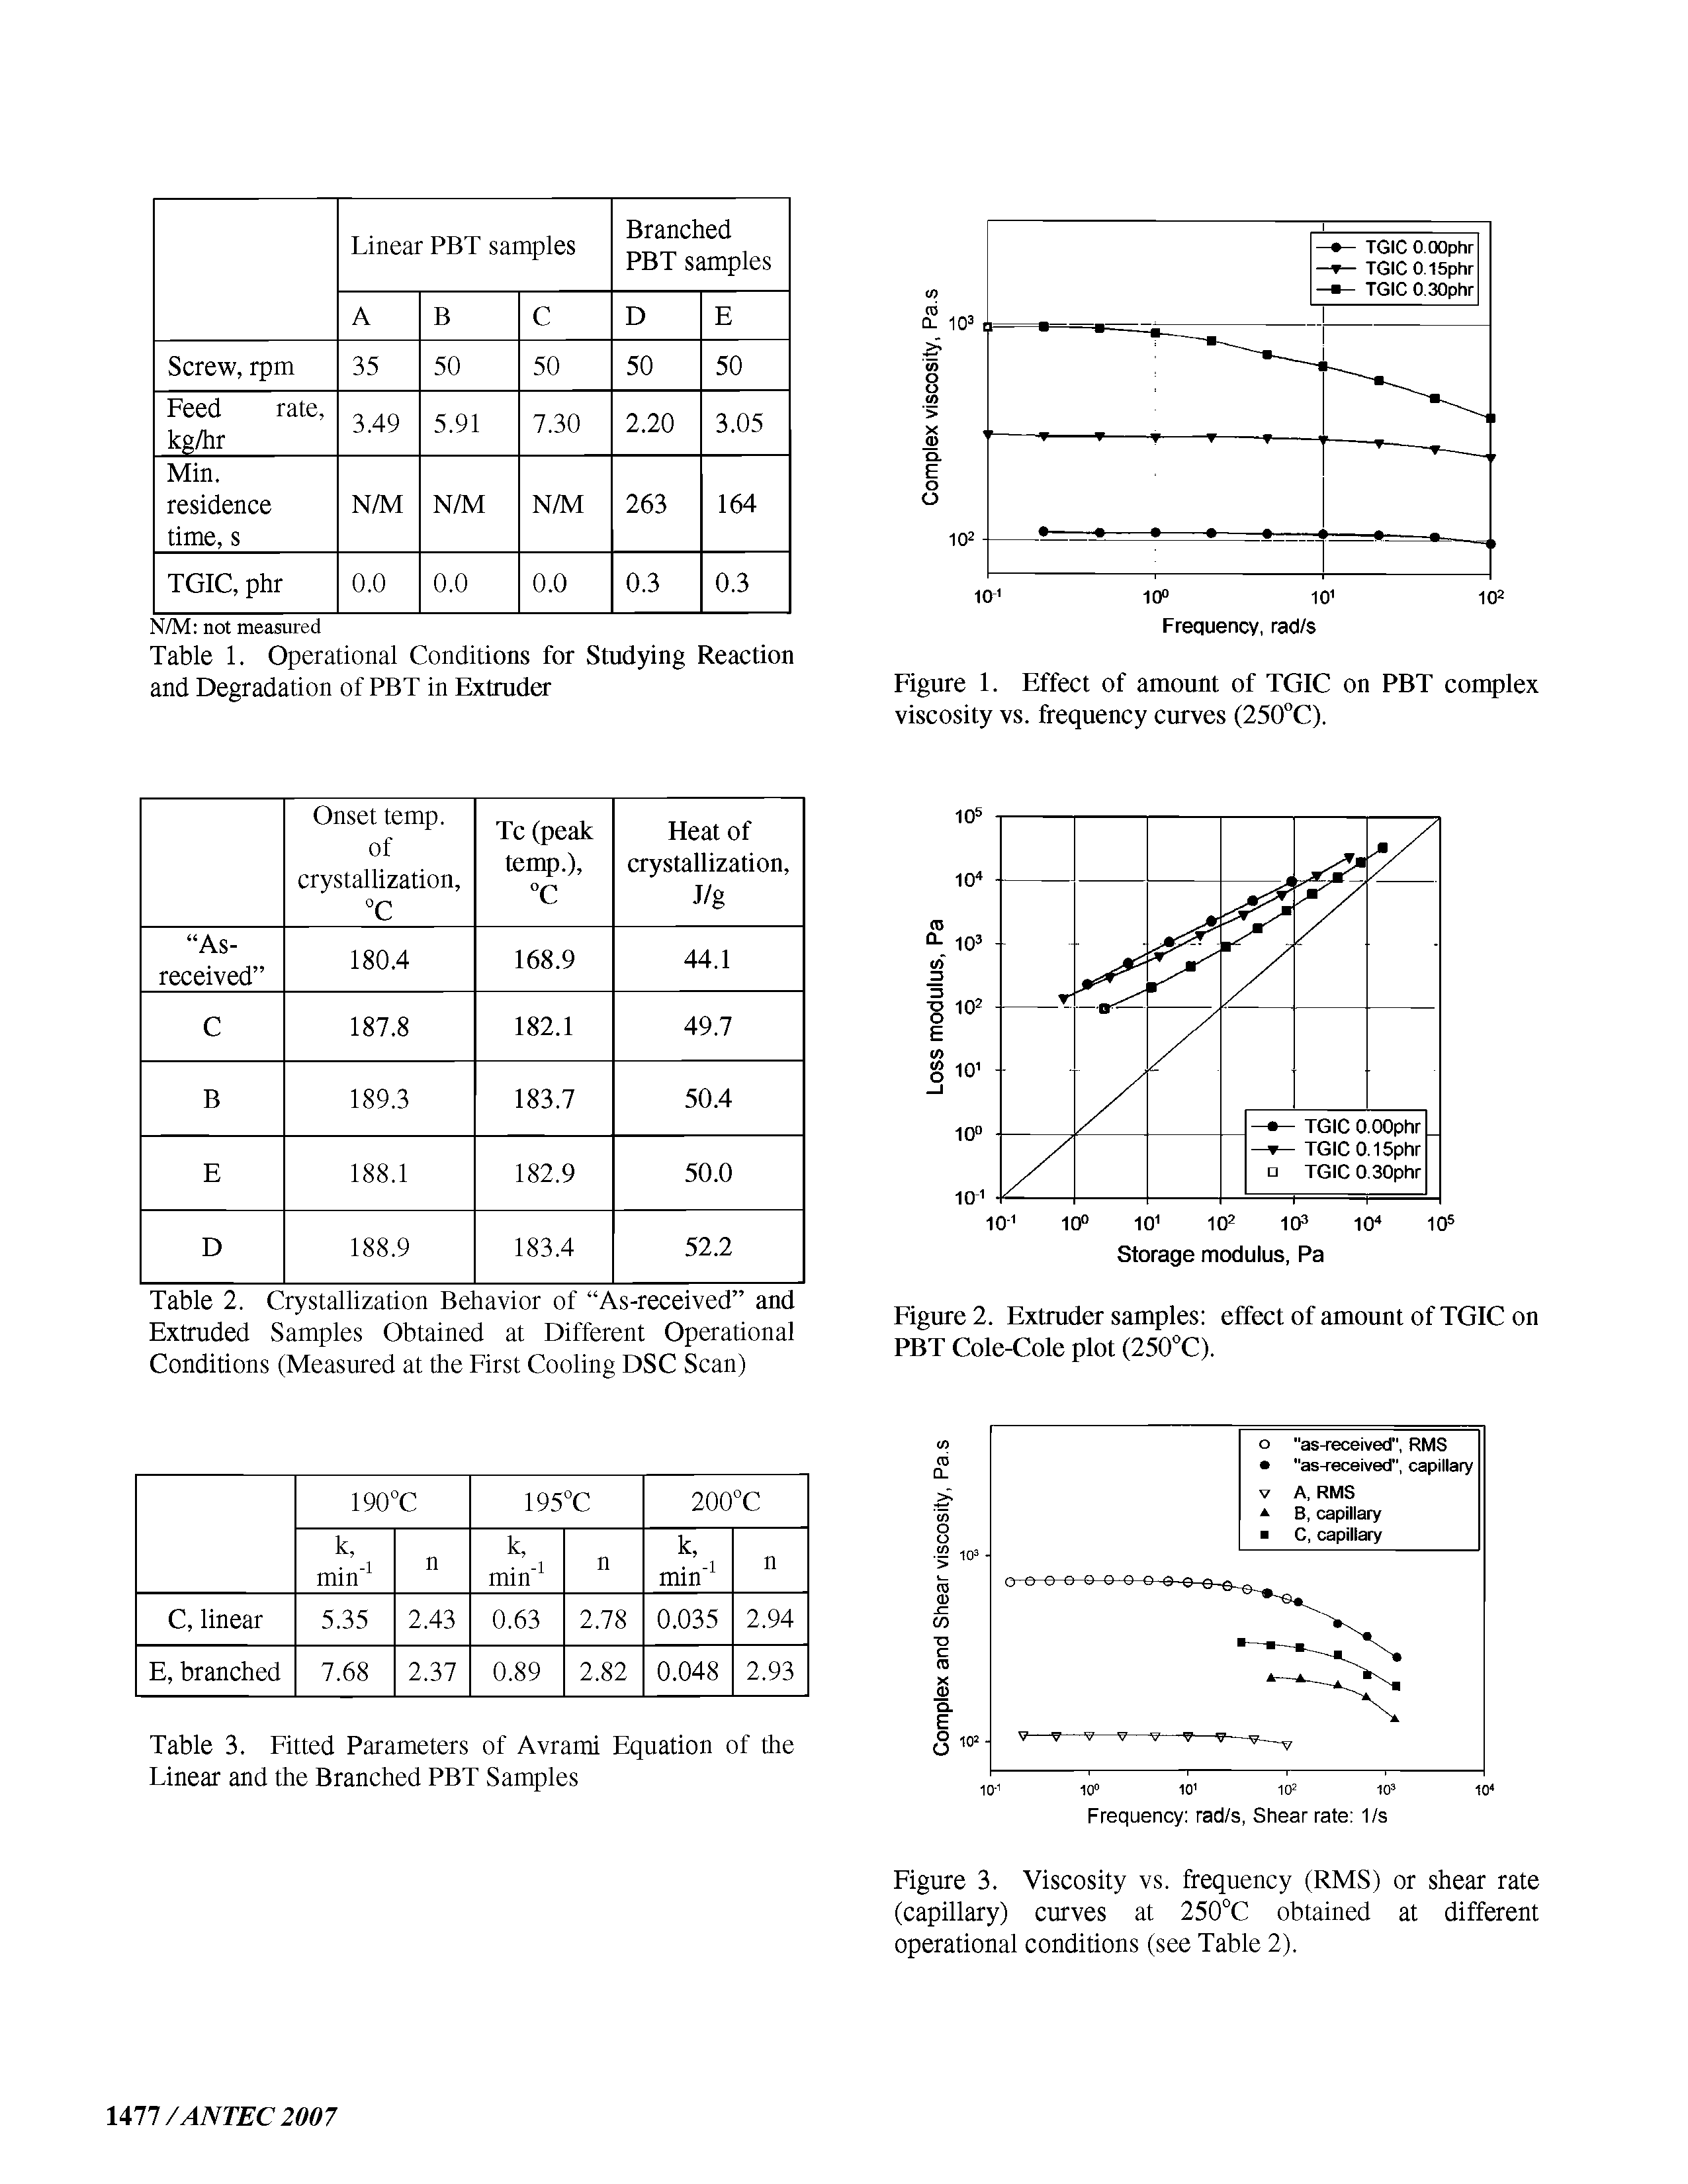 Figure 3. Viscosity vs. frequency (RMS) or shear rate (capillary) curves at 250°C obtained at different operational conditions (see Table 2).